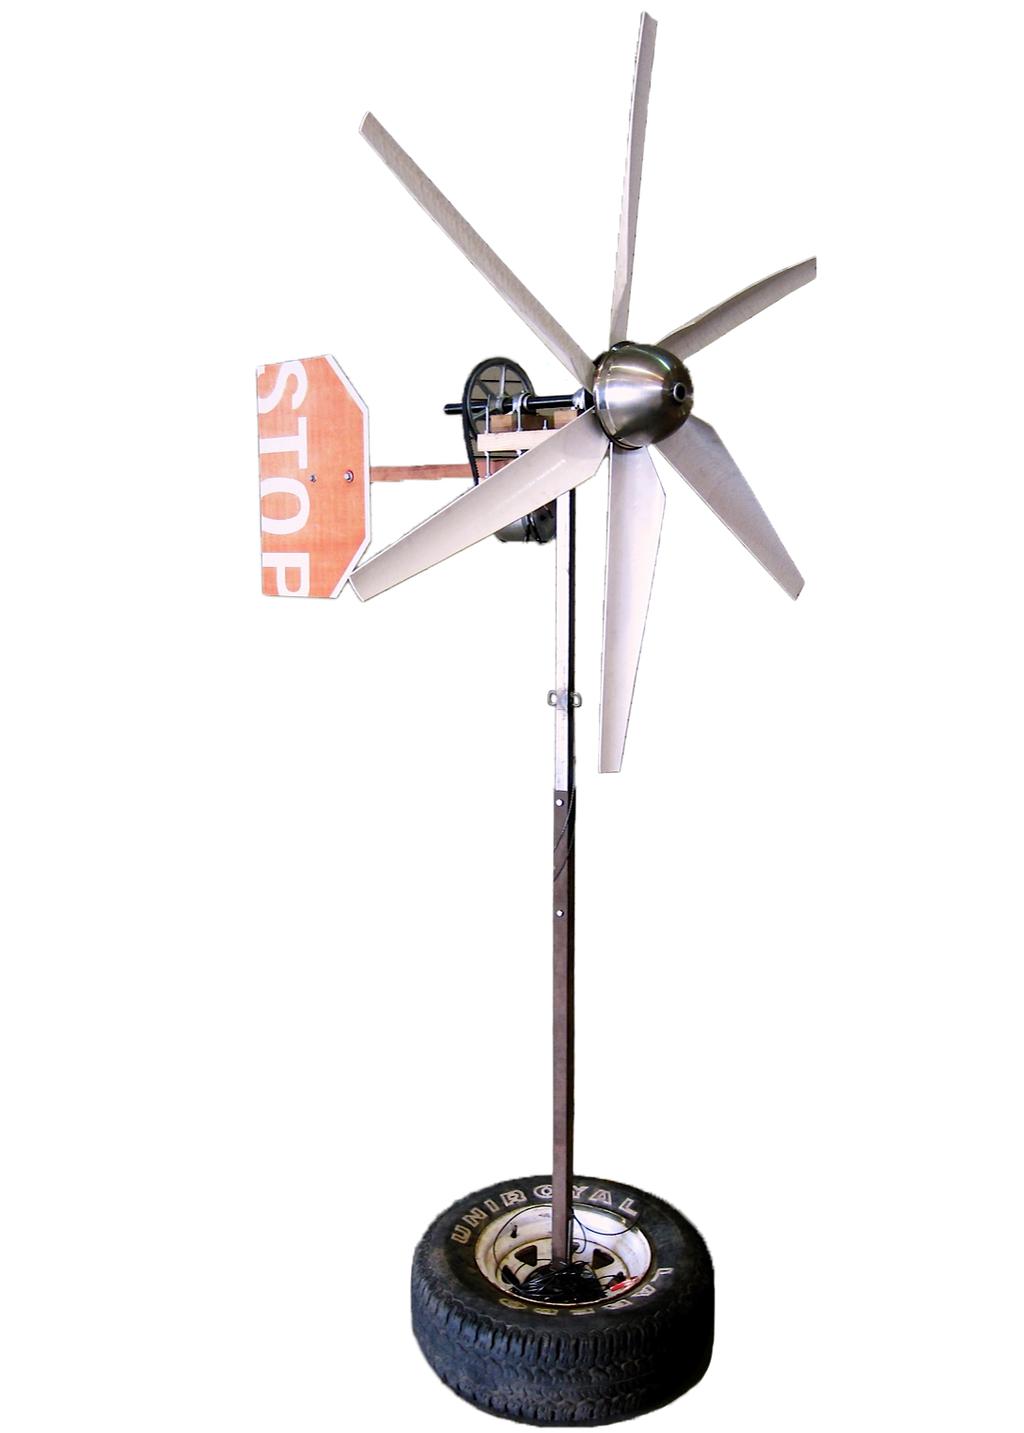 Prototype Figures 3 5 are photos of the wind turbine prototype. By comparison of Figures 1 and 3, one can observe slight differences between the model and the prototype.